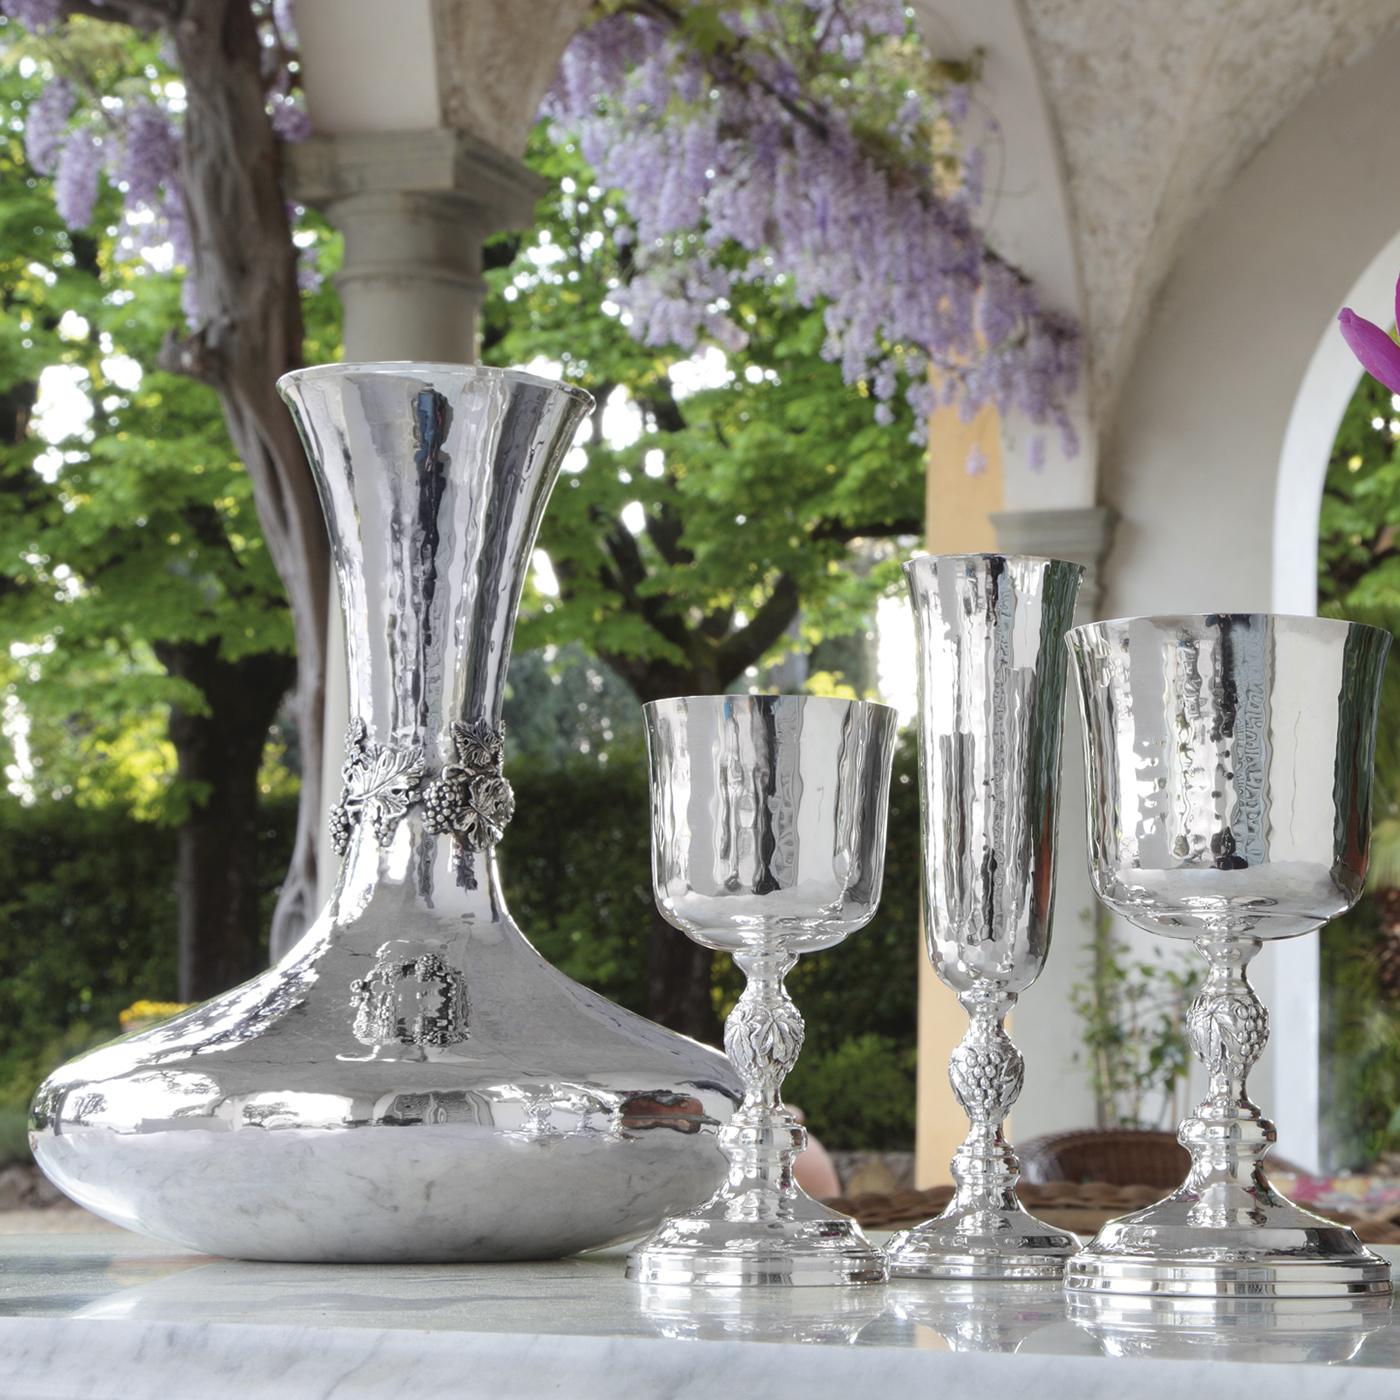 This large decanter features elegant grapevine detailing on its neck. It is designed to elevate the bouquet and taste of the liquor. Made from silver, it offers antibacterial and antimicrobial properties, making it perfect for storage. It has an old